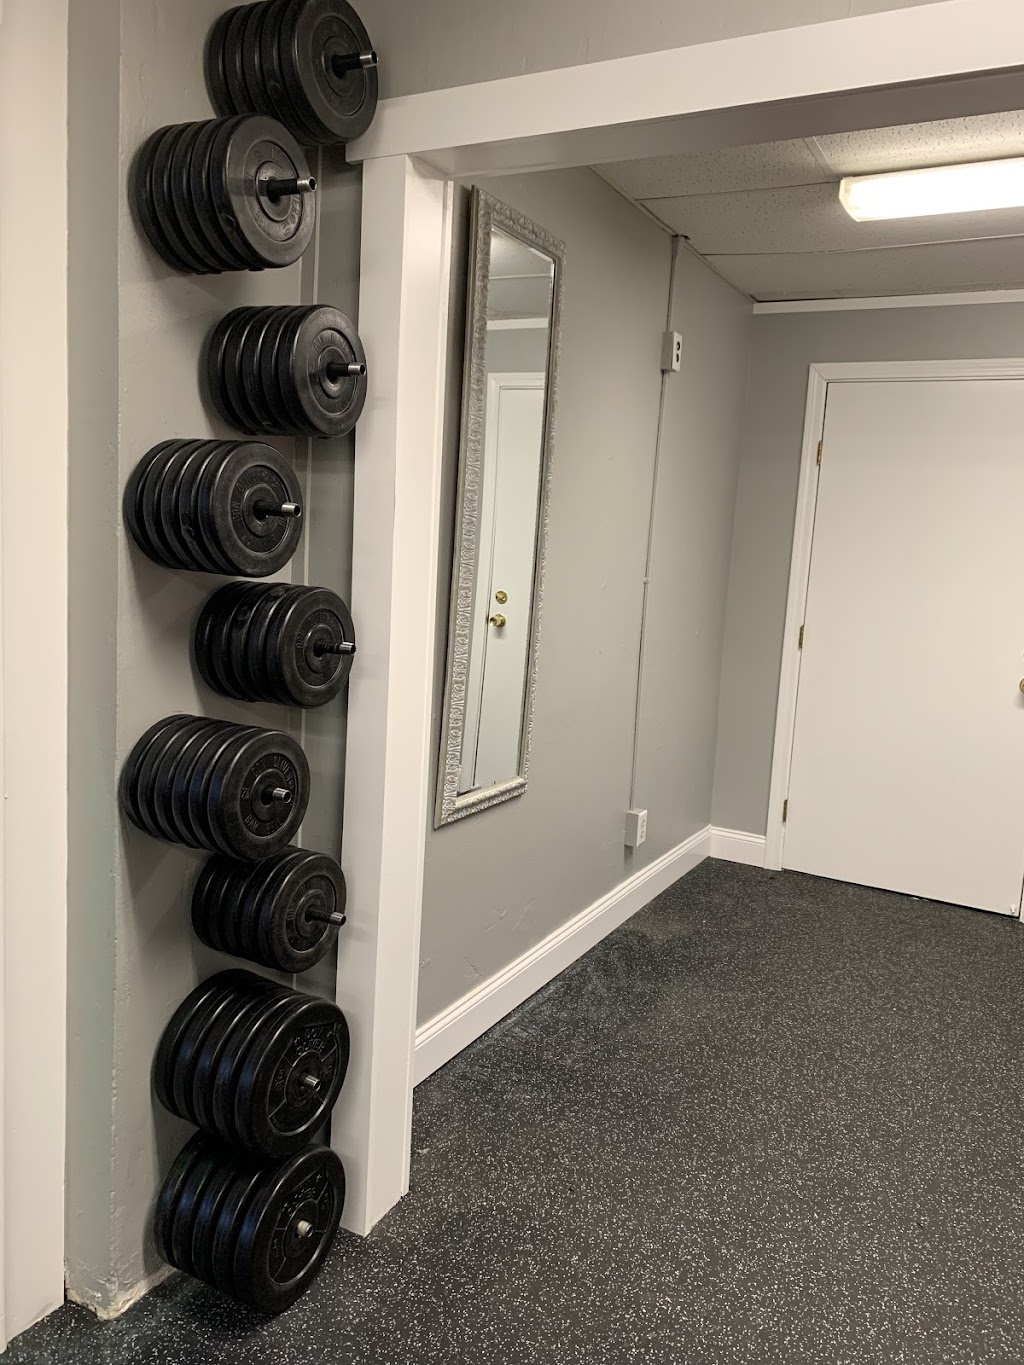 52Fit | 52 Main St, North Reading, MA 01864 | Phone: (781) 856-6896